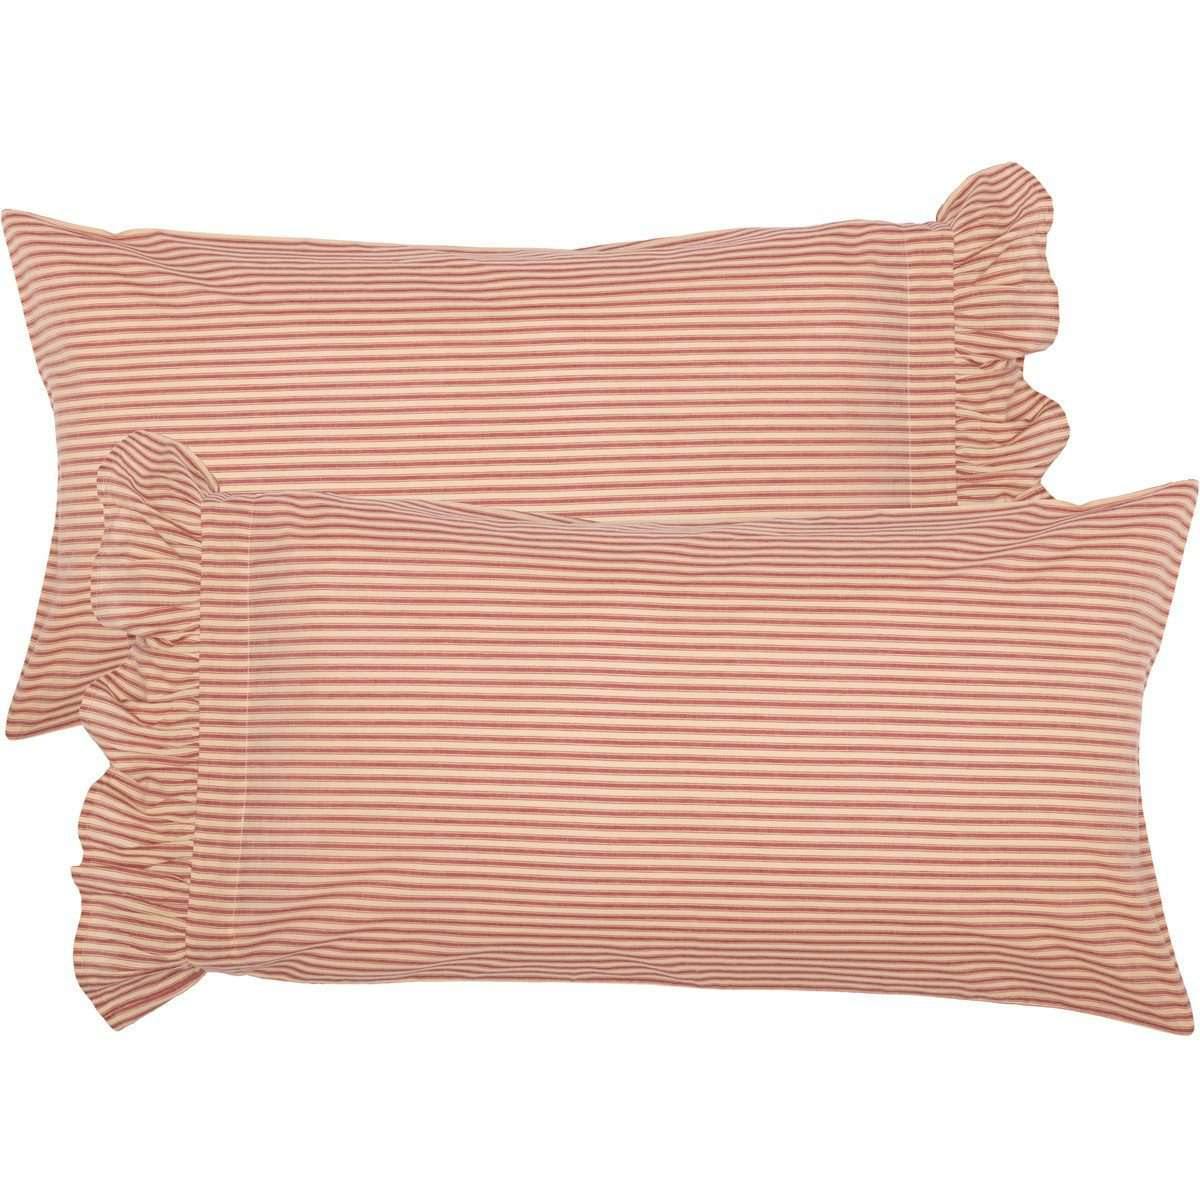 Sawyer Mill Red Ticking Stripe King Pillow Case Set of 2 21x40 VHC Brands - The Fox Decor